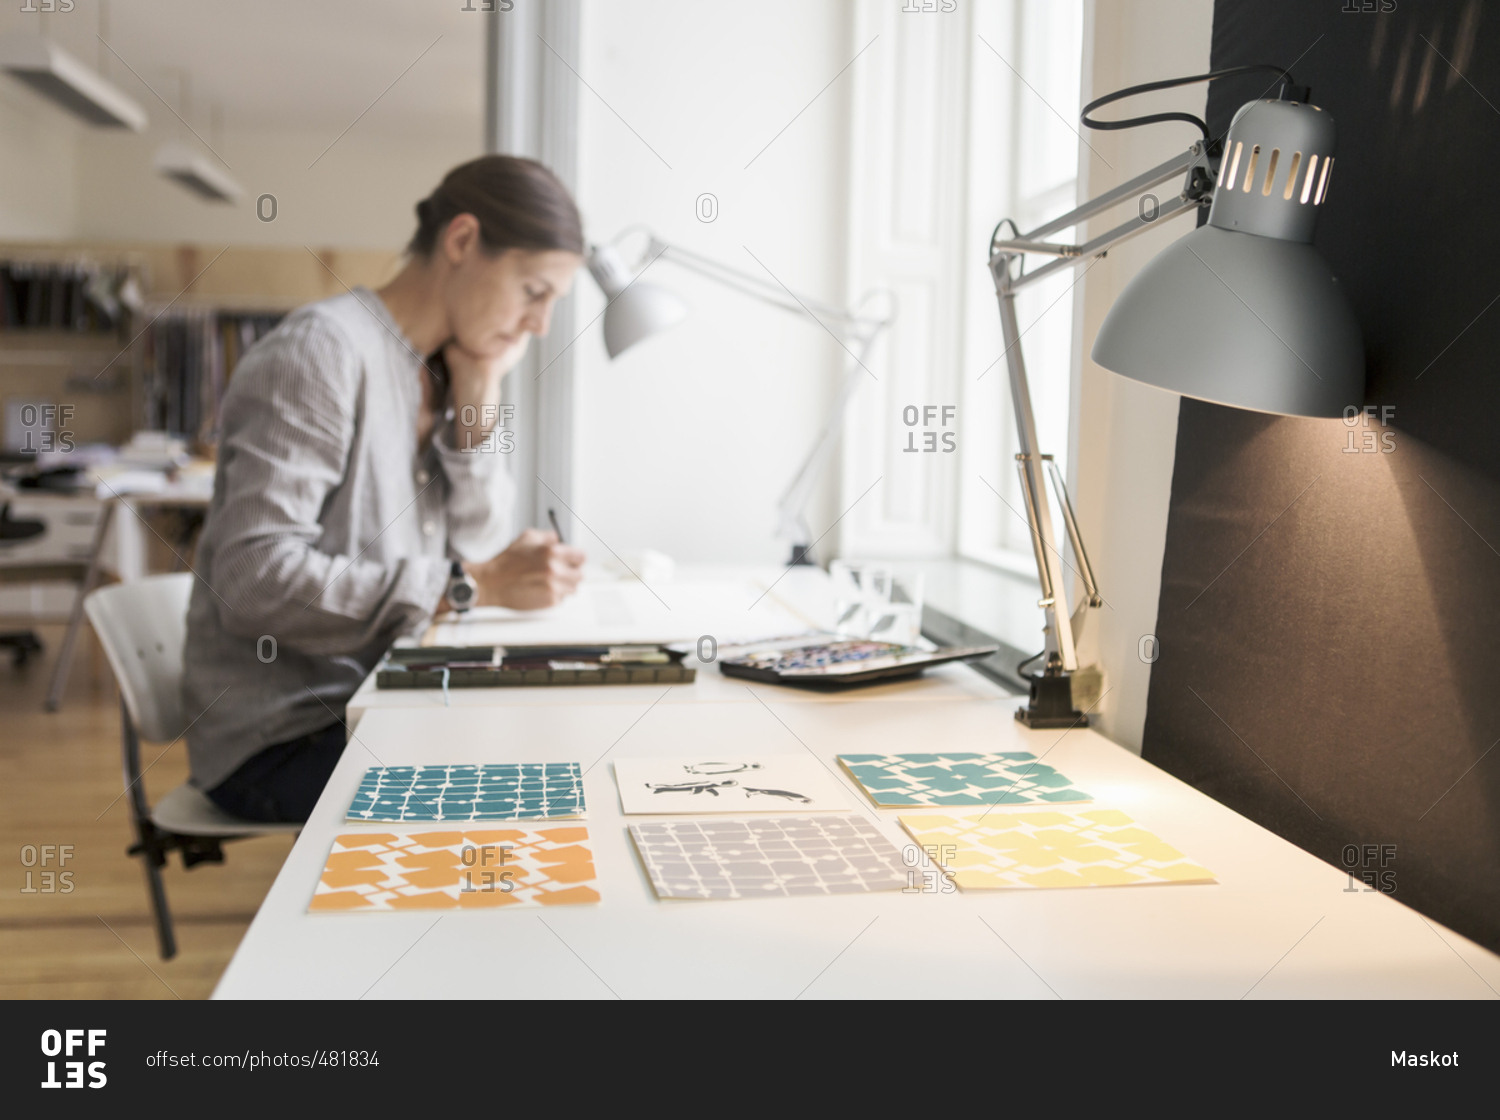 Woman painting on canvas by illuminated desk lamp at creative office